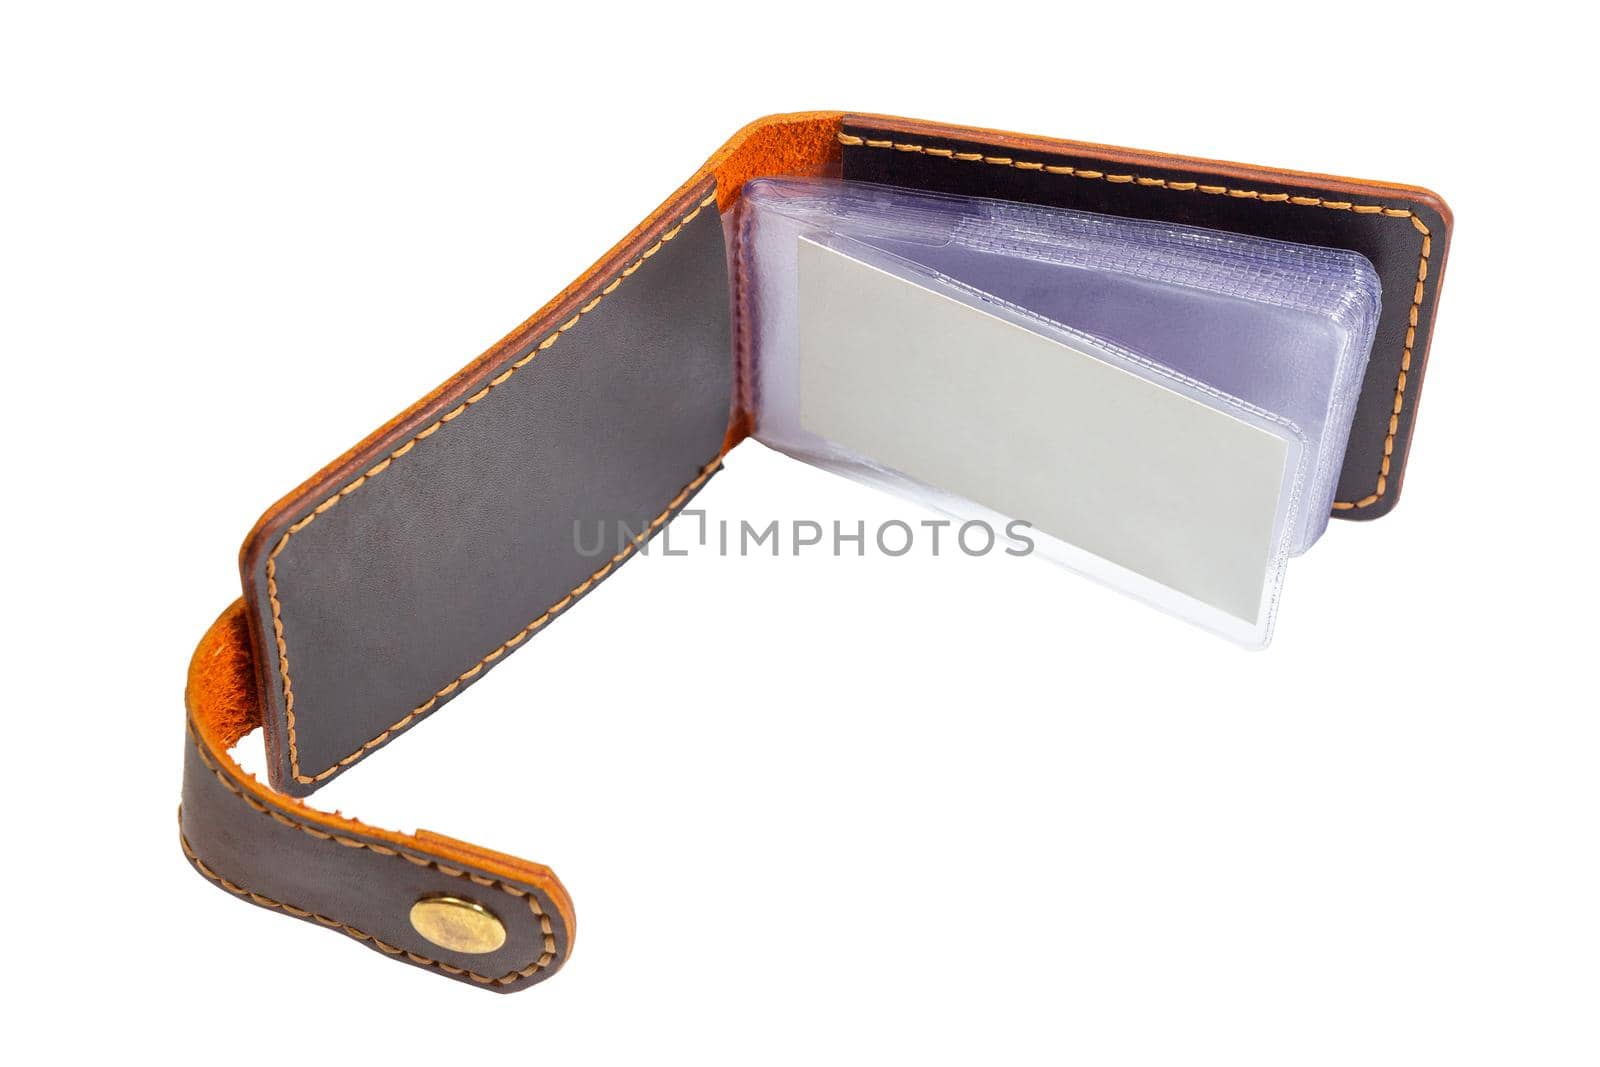 Open luxury craft business card holder case made of leather. Black Leather box for cards isolated on white background.